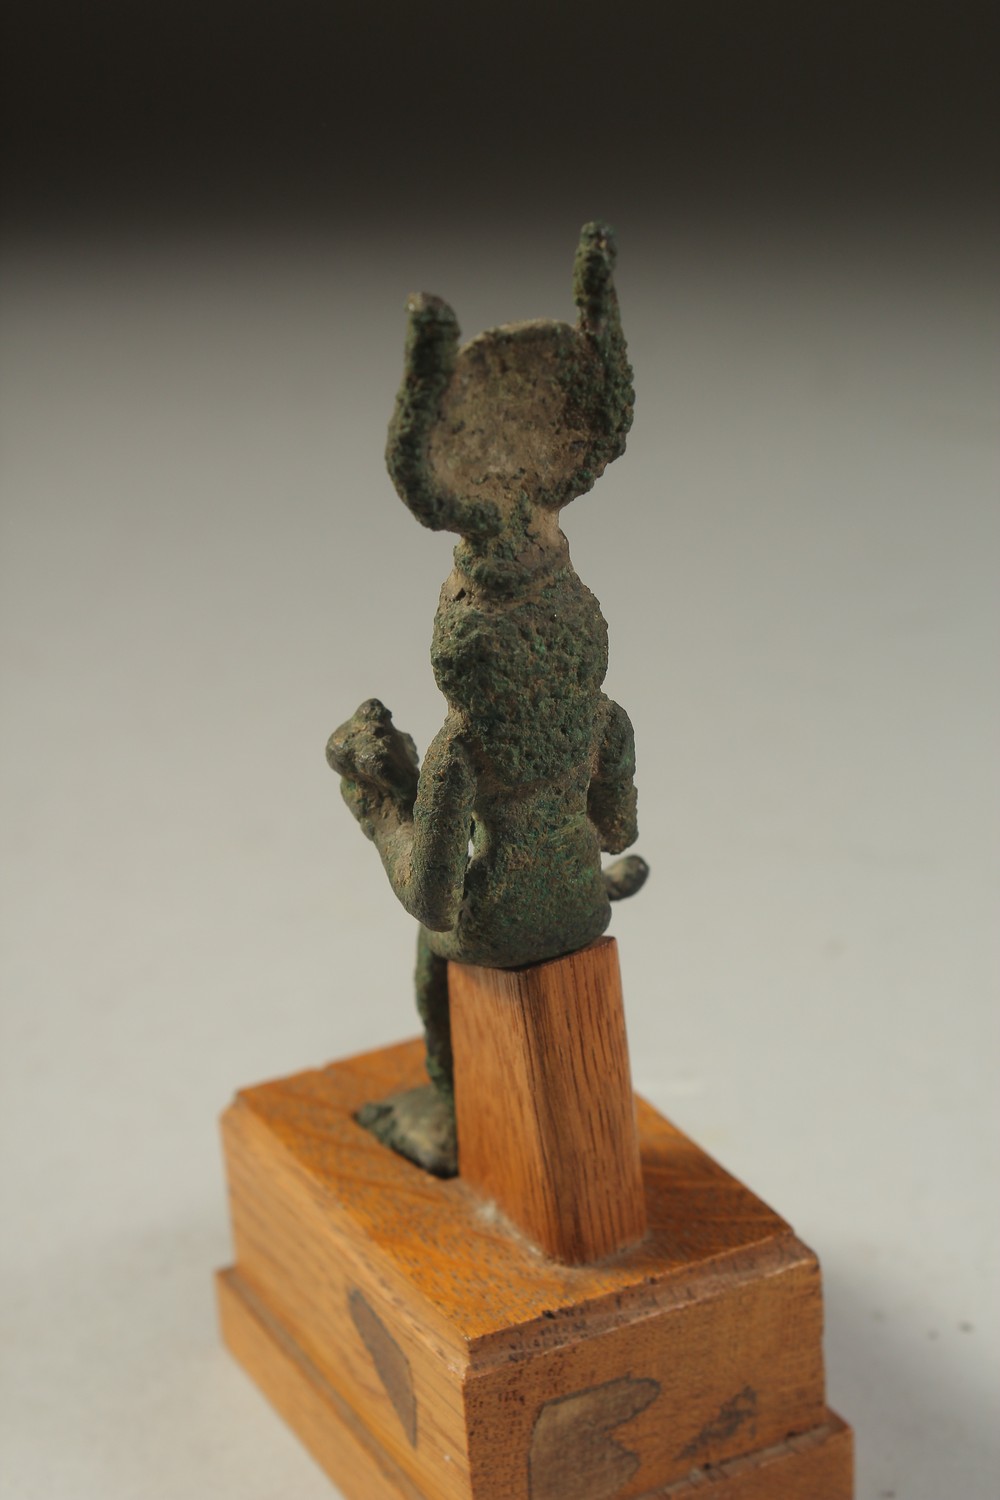 A RARE ANCIENT EYGPTIAN BRONZE FIGURE OF ISIS NURTURING HORUS, on a wooden stand, bronze 12cm high. - Image 4 of 4